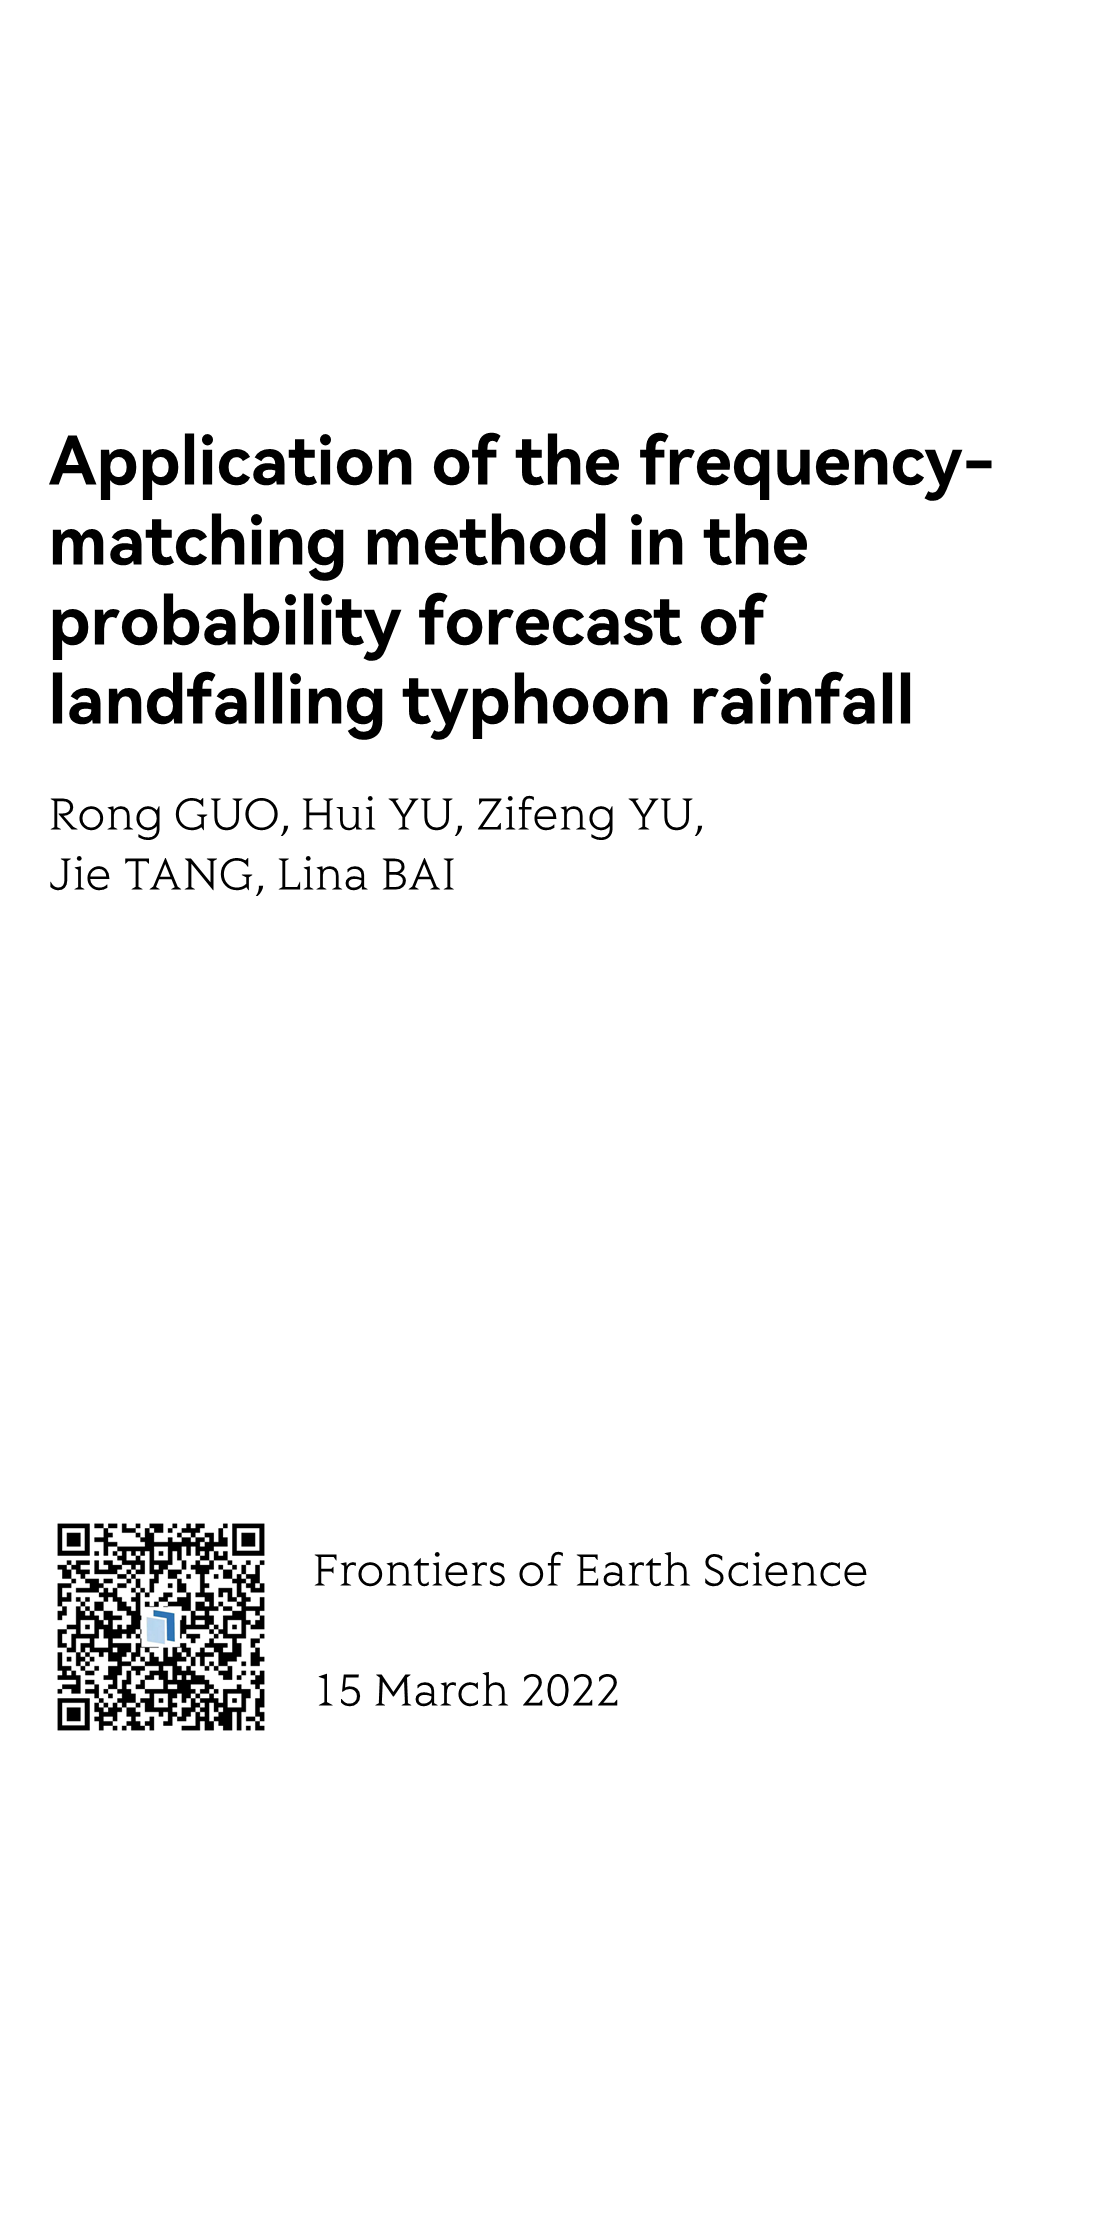 Application of the frequency-matching method in the probability forecast of landfalling typhoon rainfall_1